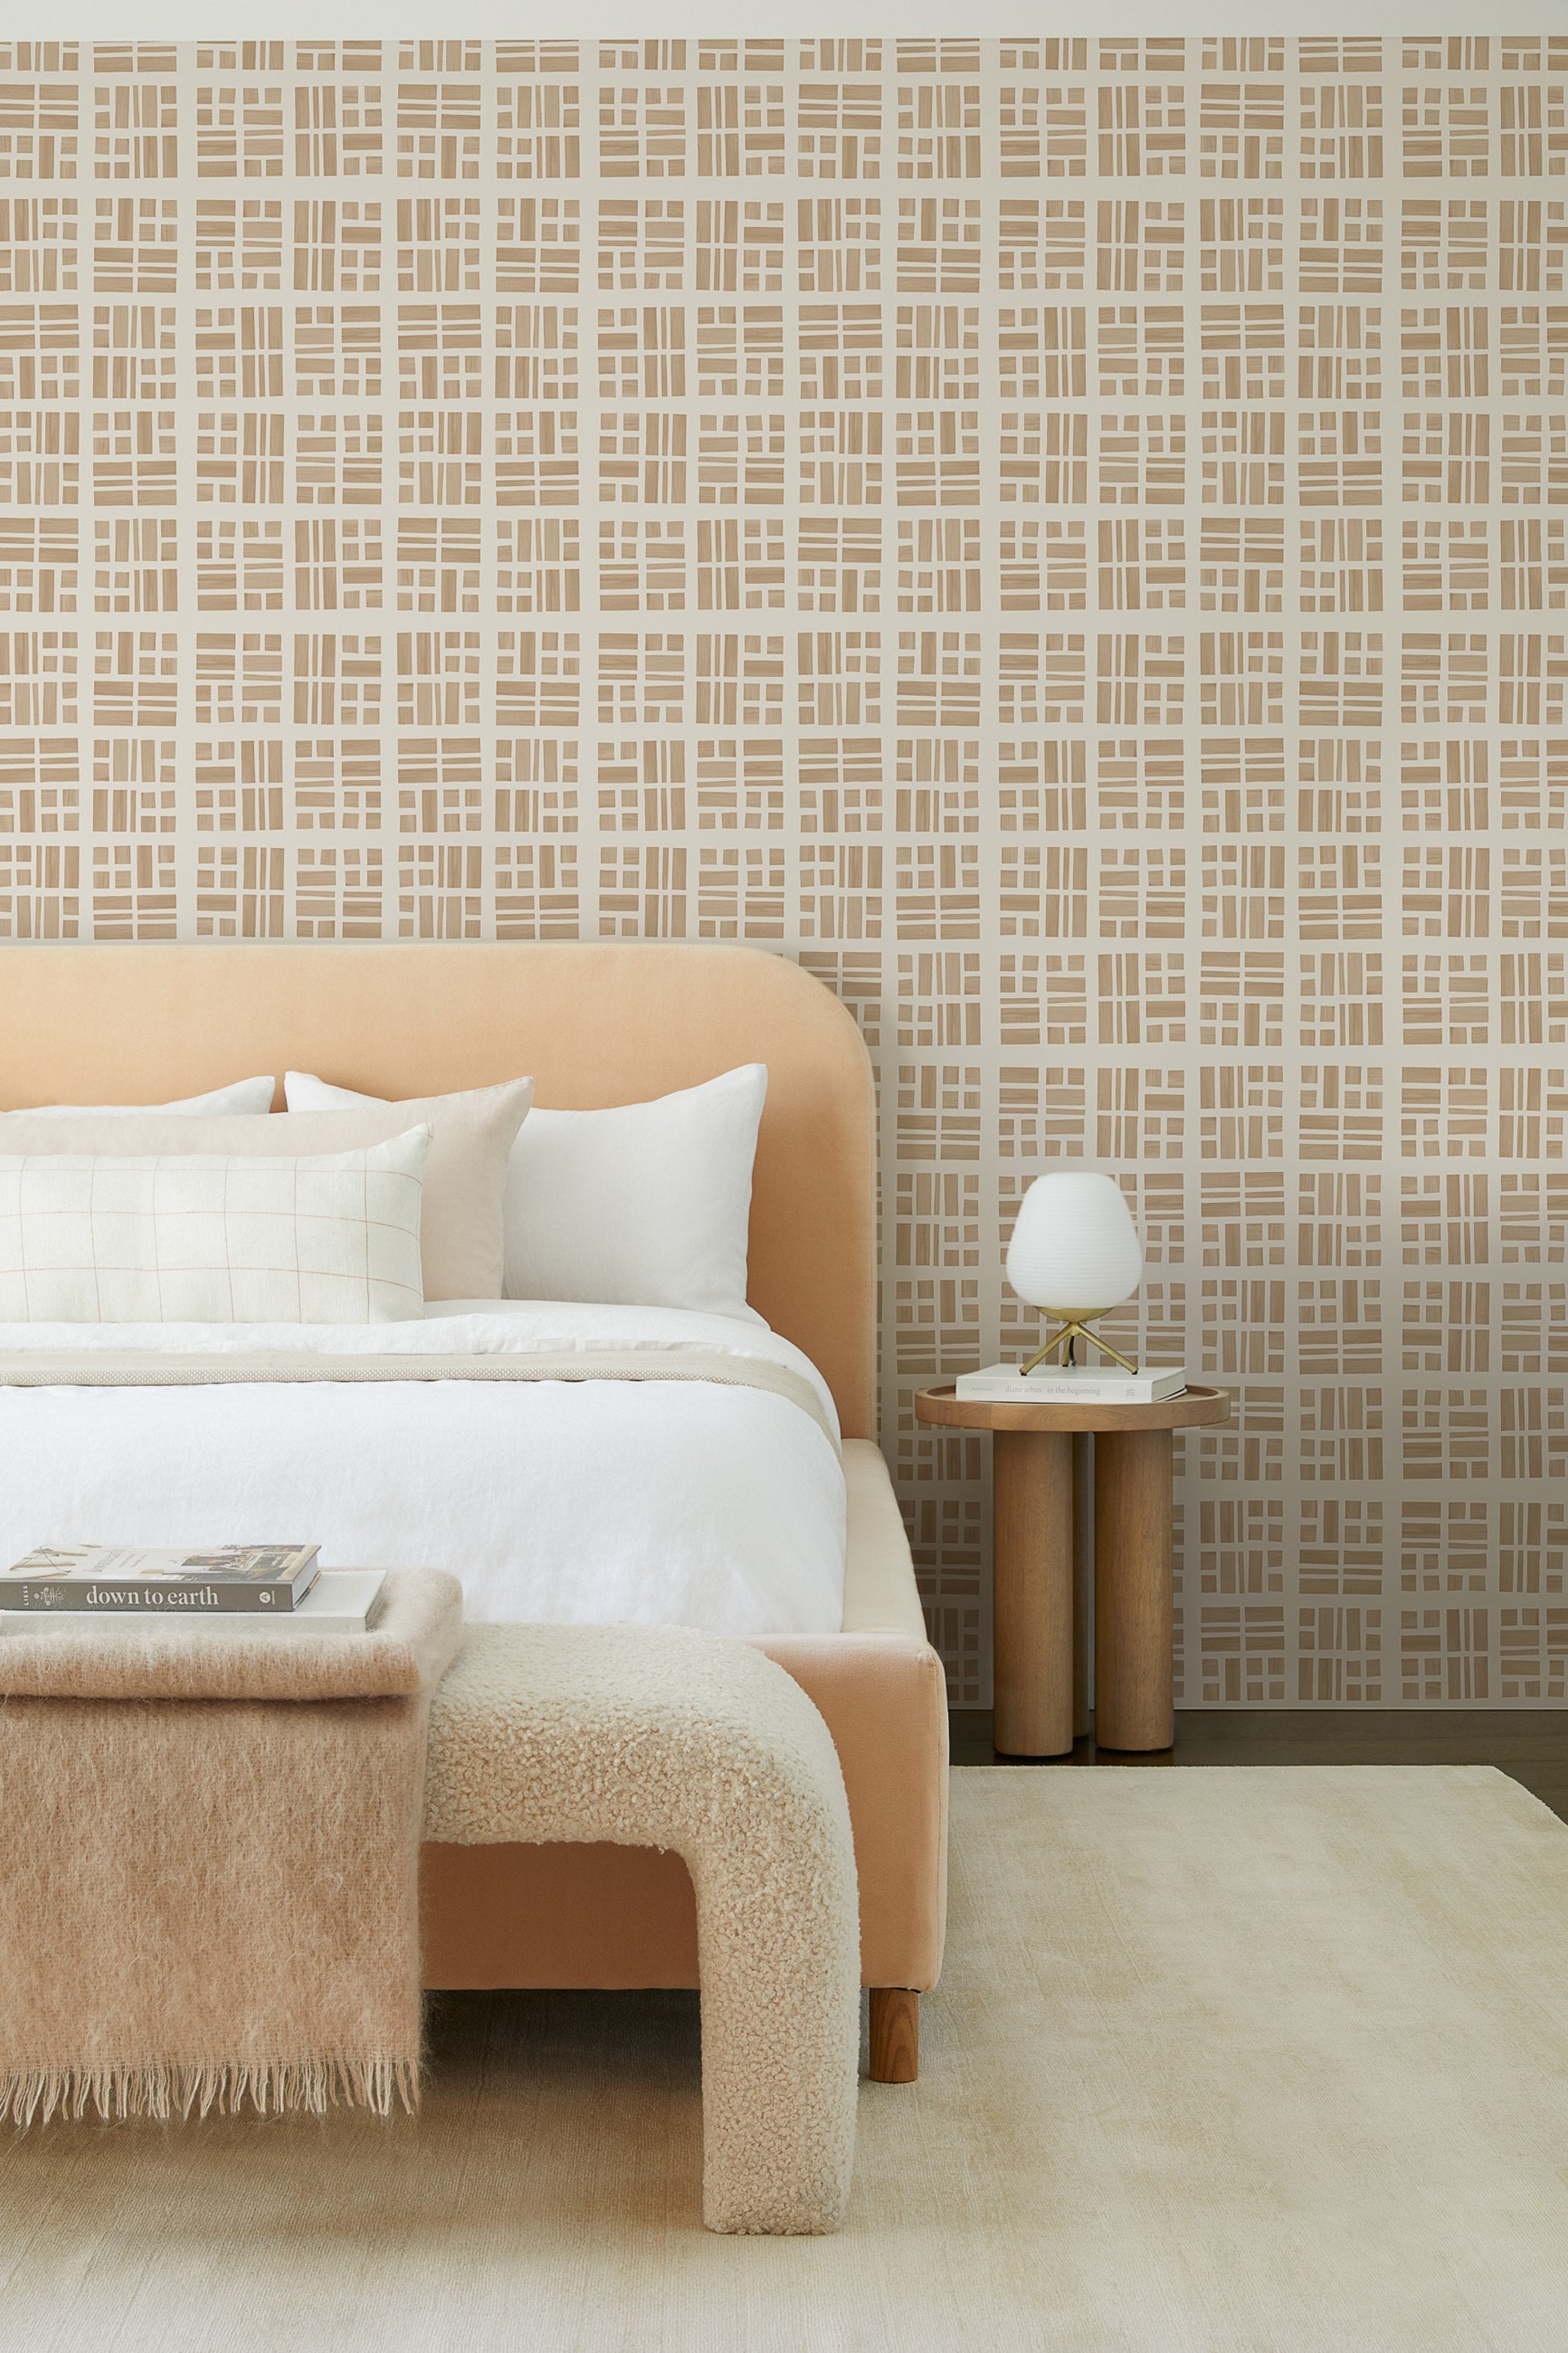 A bold taupe and natural grid Takeo wallpaper sets the tone for this bedroom with a buff-colored Solene upholstered platform bed with neutral bedding and a neutral boucle Tate bench at the foot of the bed.